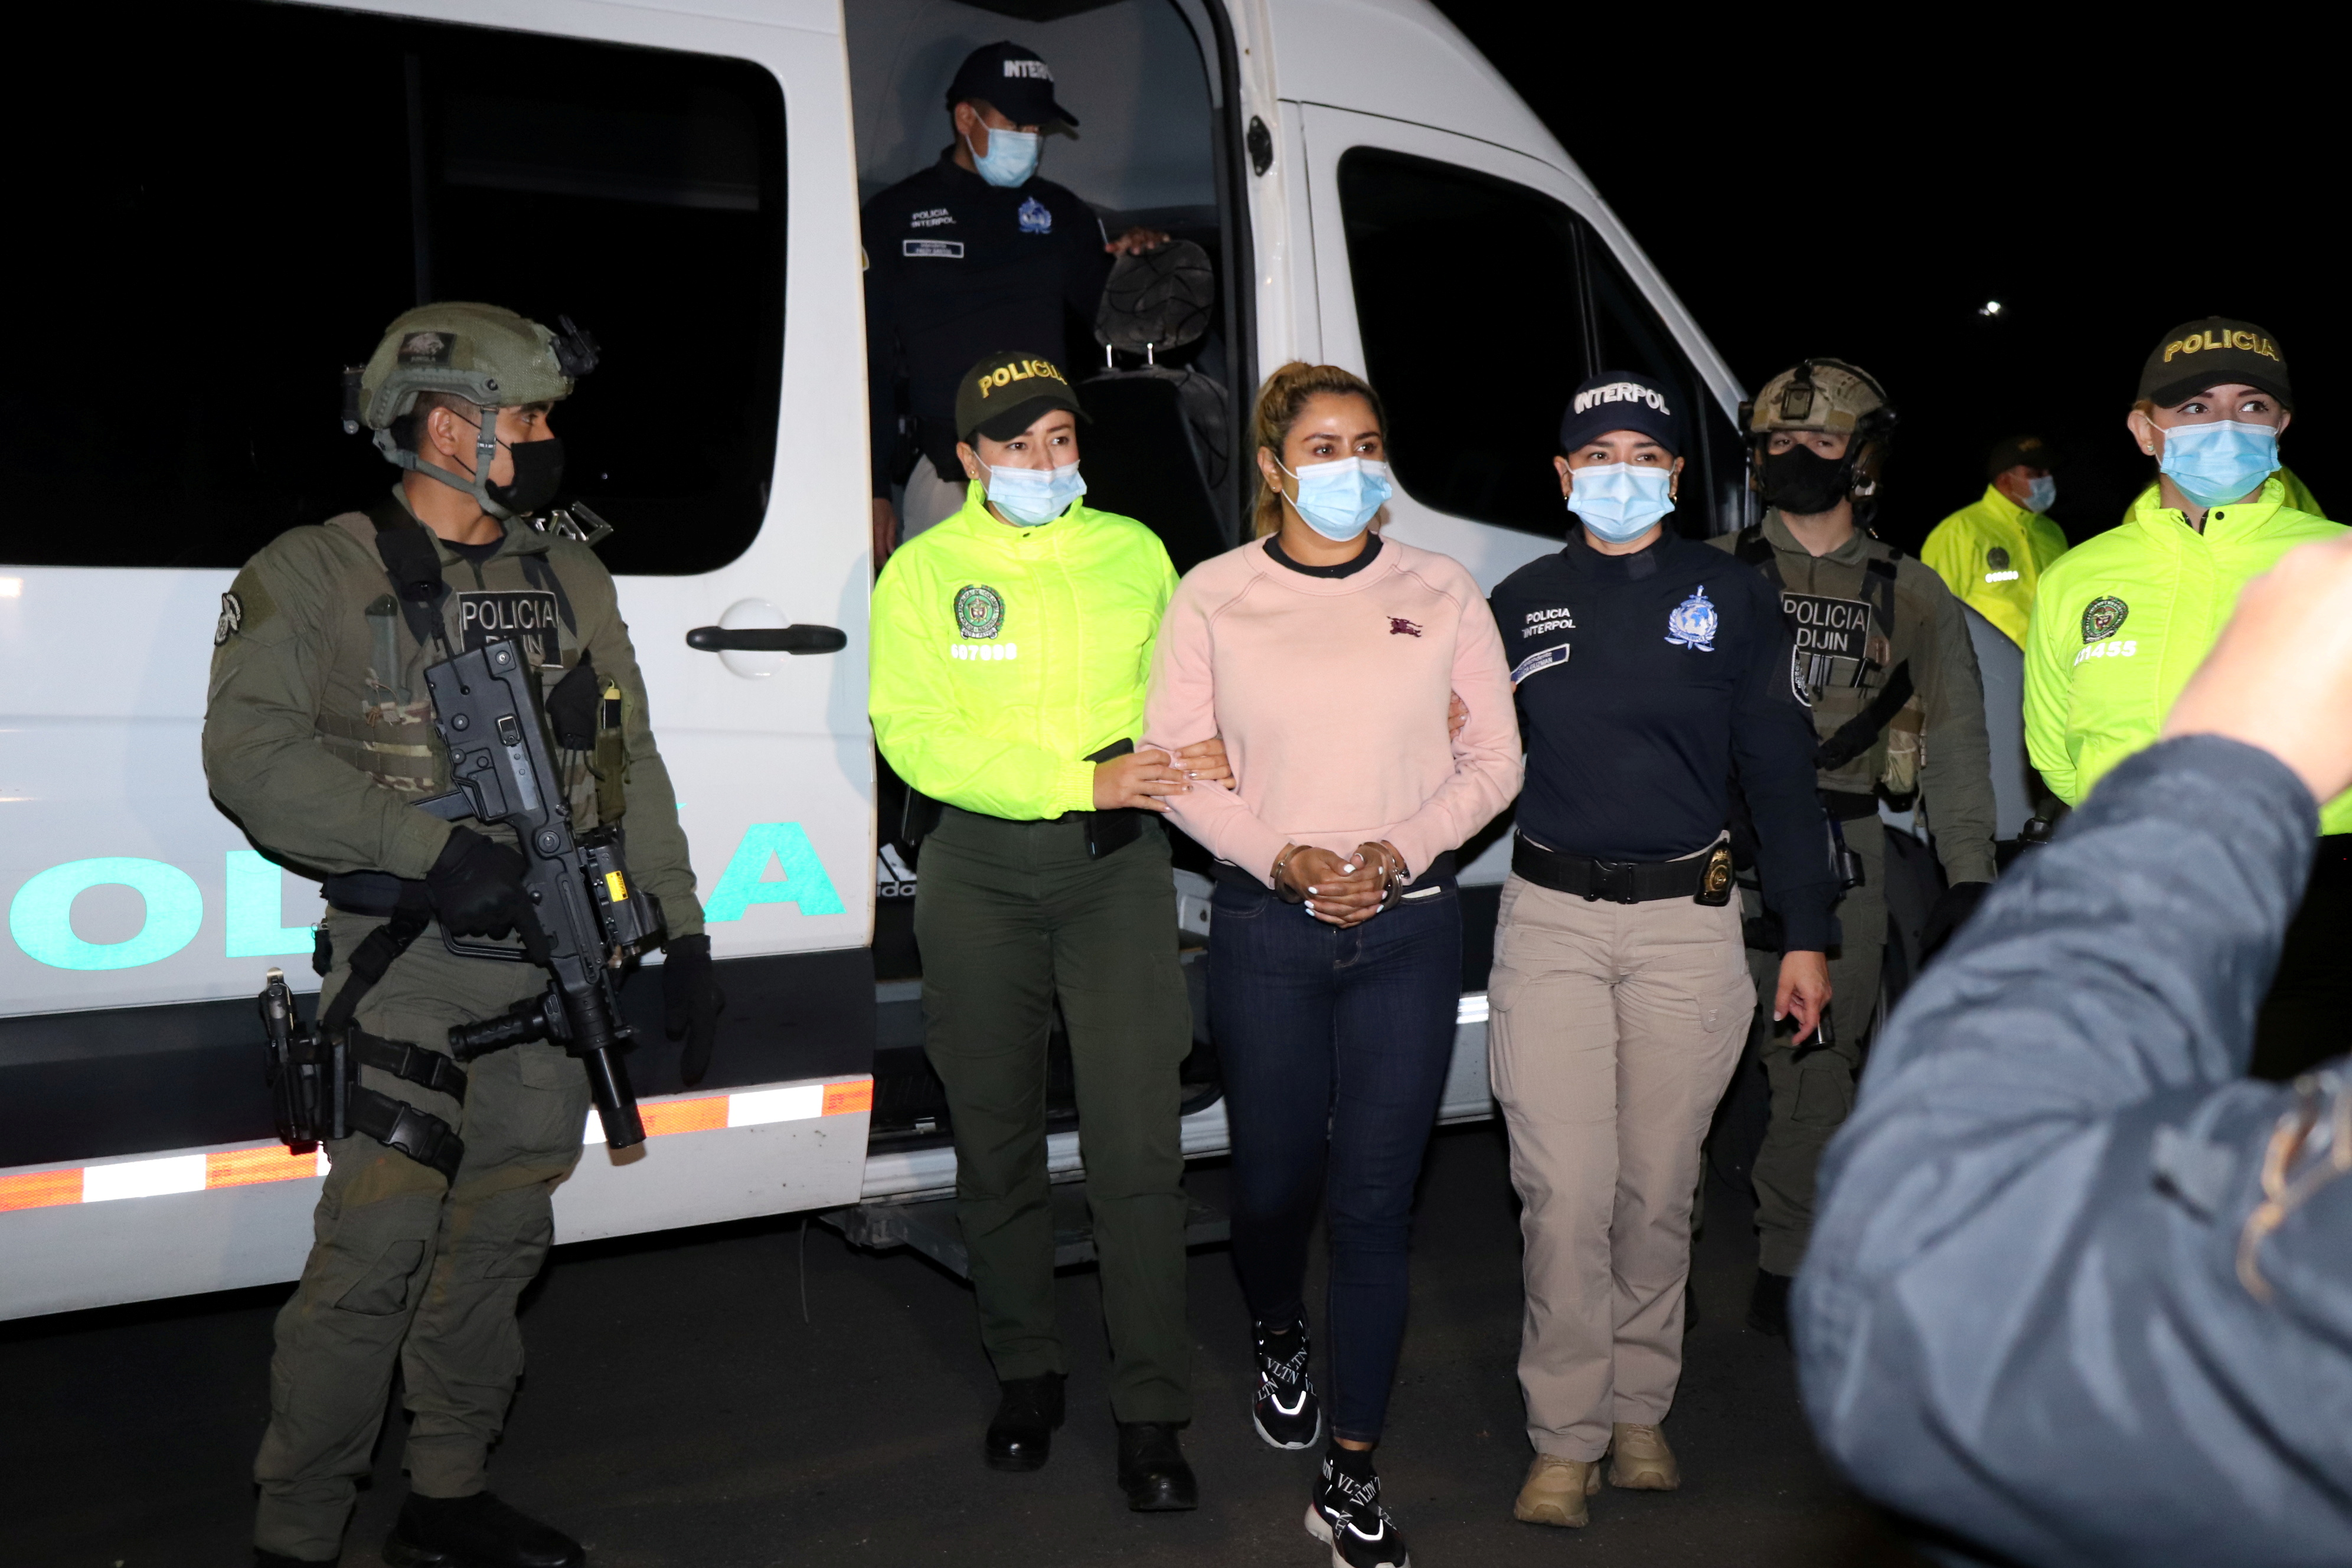 Colombian National Police officers escort Nini Johana Usuga, alias 'La Negra', sister of 'Otoniel', top leader of the organized armed group Clan del Golfo, after her arrest in Sabaneta, Colombia March 18, 2021. Colombian National Police/Handout via REUTERS 